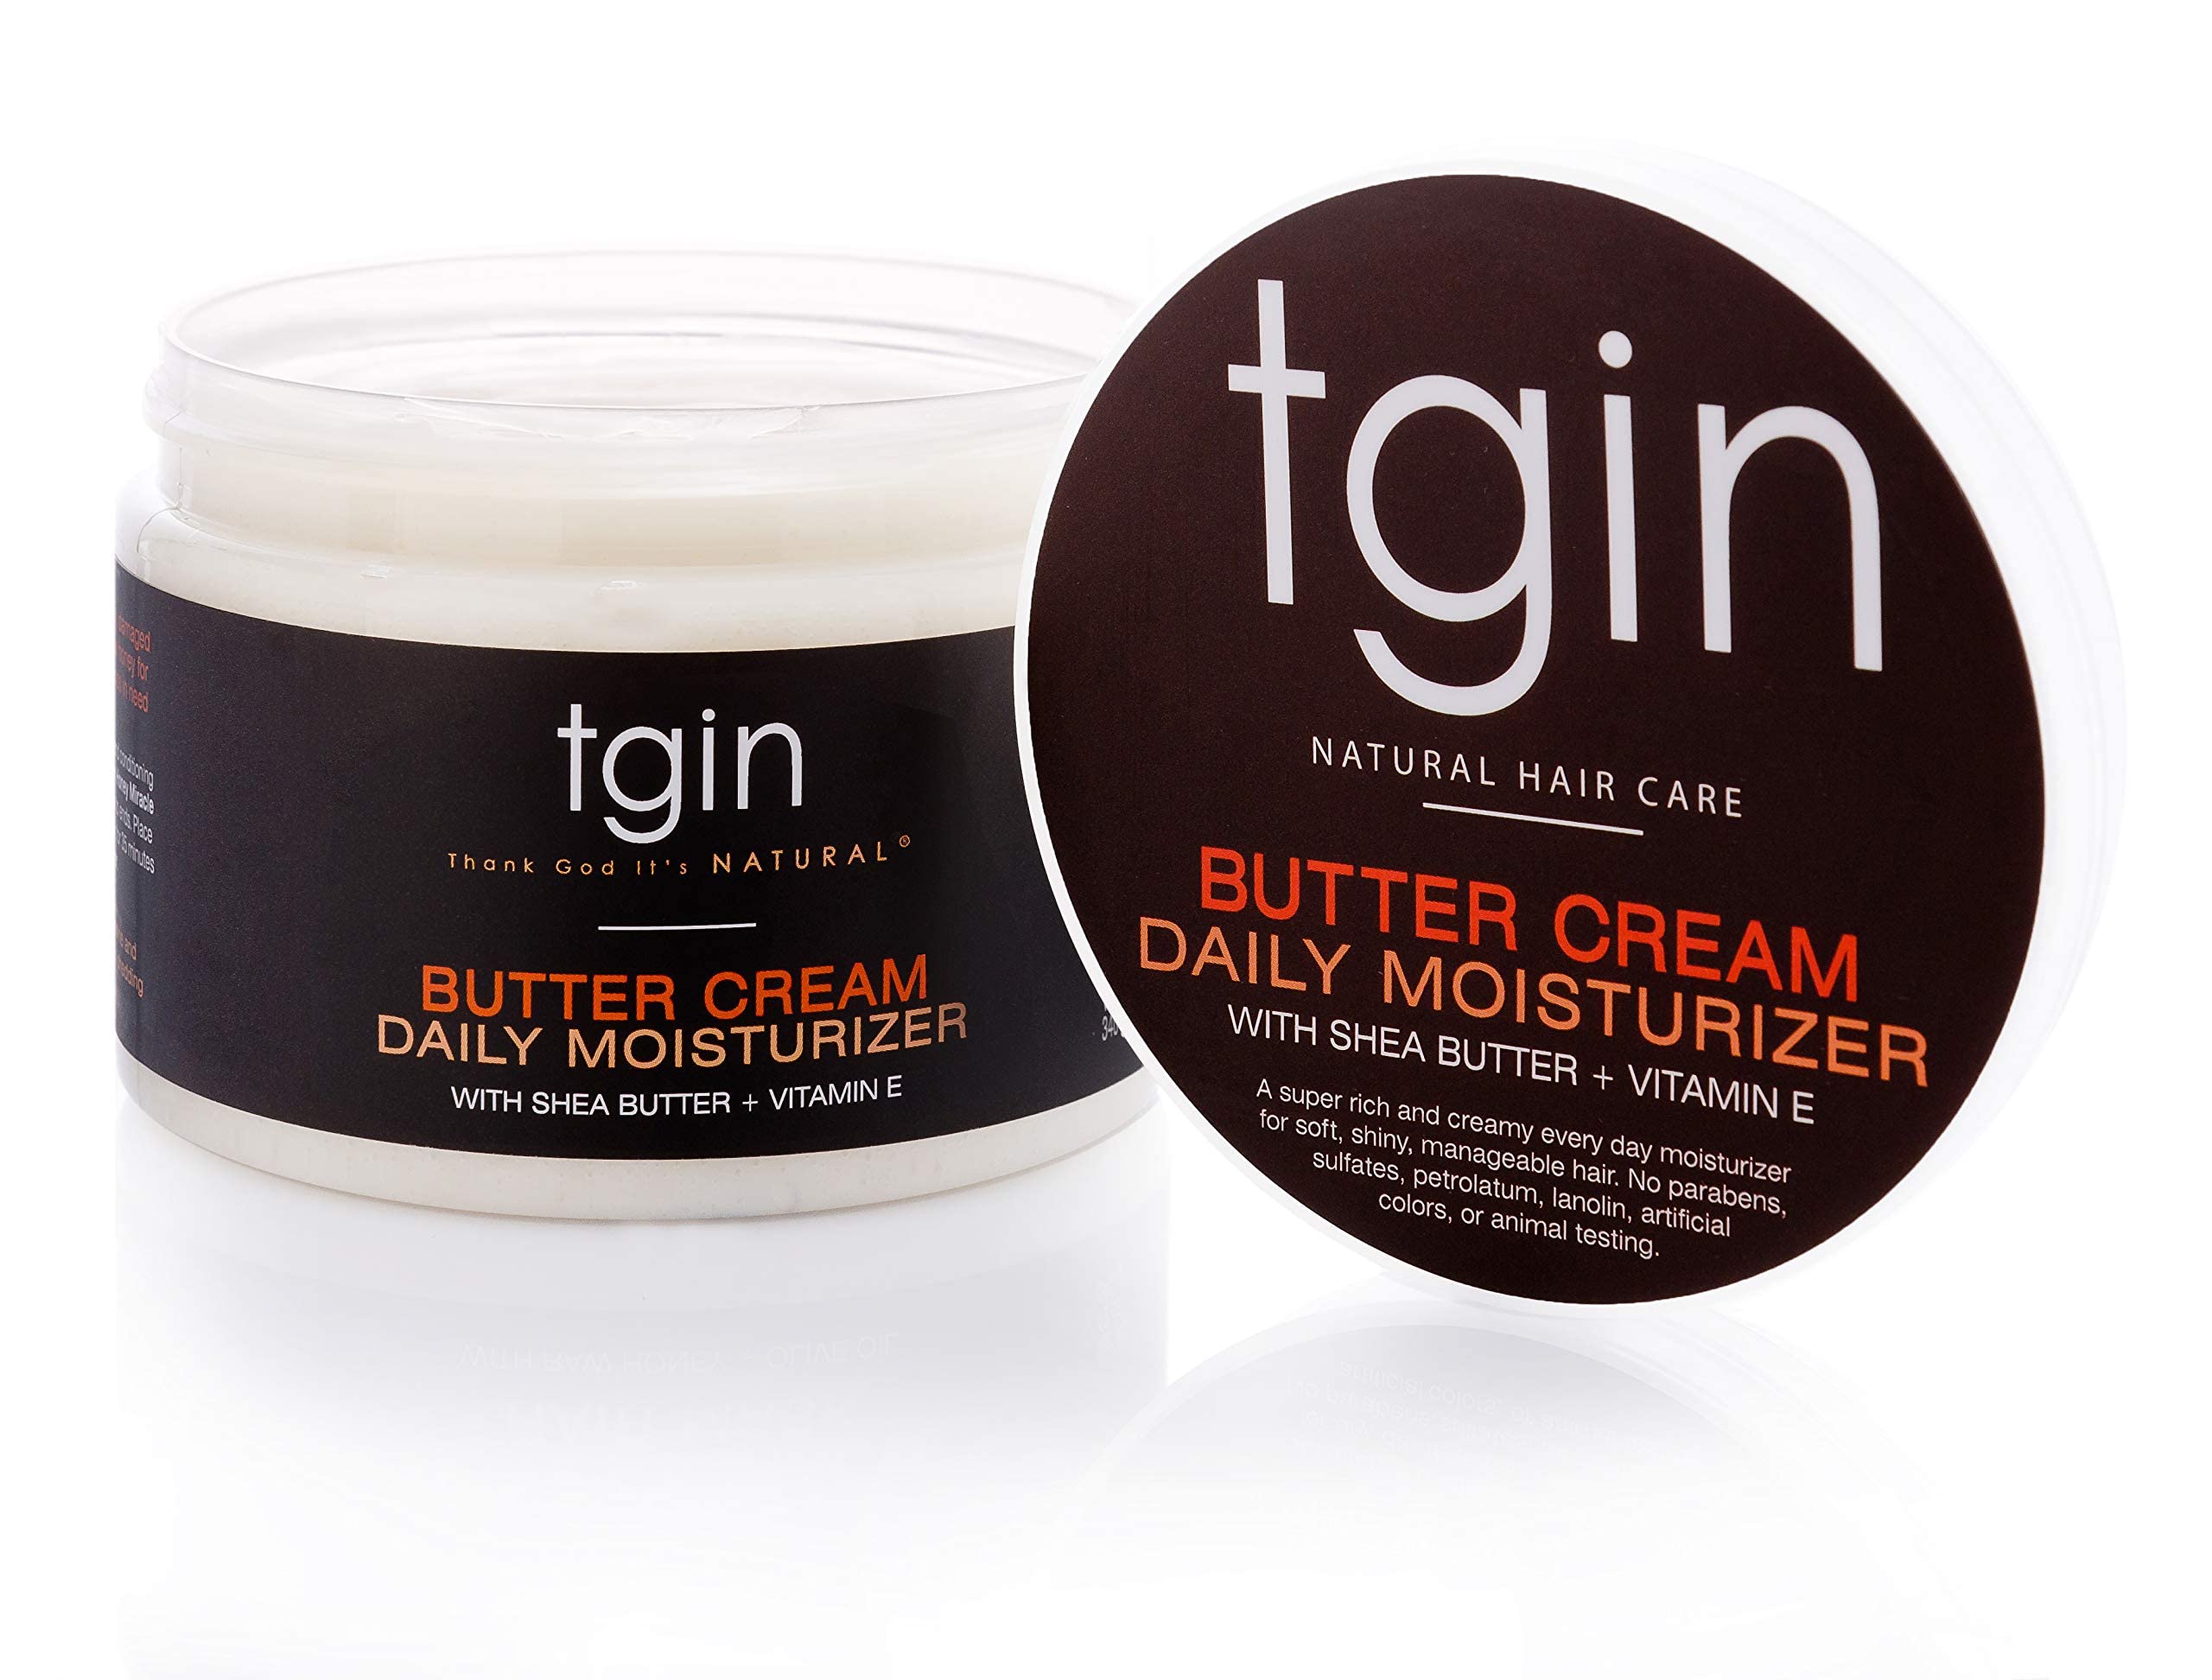 tgin Butter Cream Daily Moisturizer For Natural Hair - Dry Hair - Curly Hair - Hair Styling Product - Curl Cream - Paraben Free - Hair Cream - Type 3c and 4c hair - Styler - 12 Oz